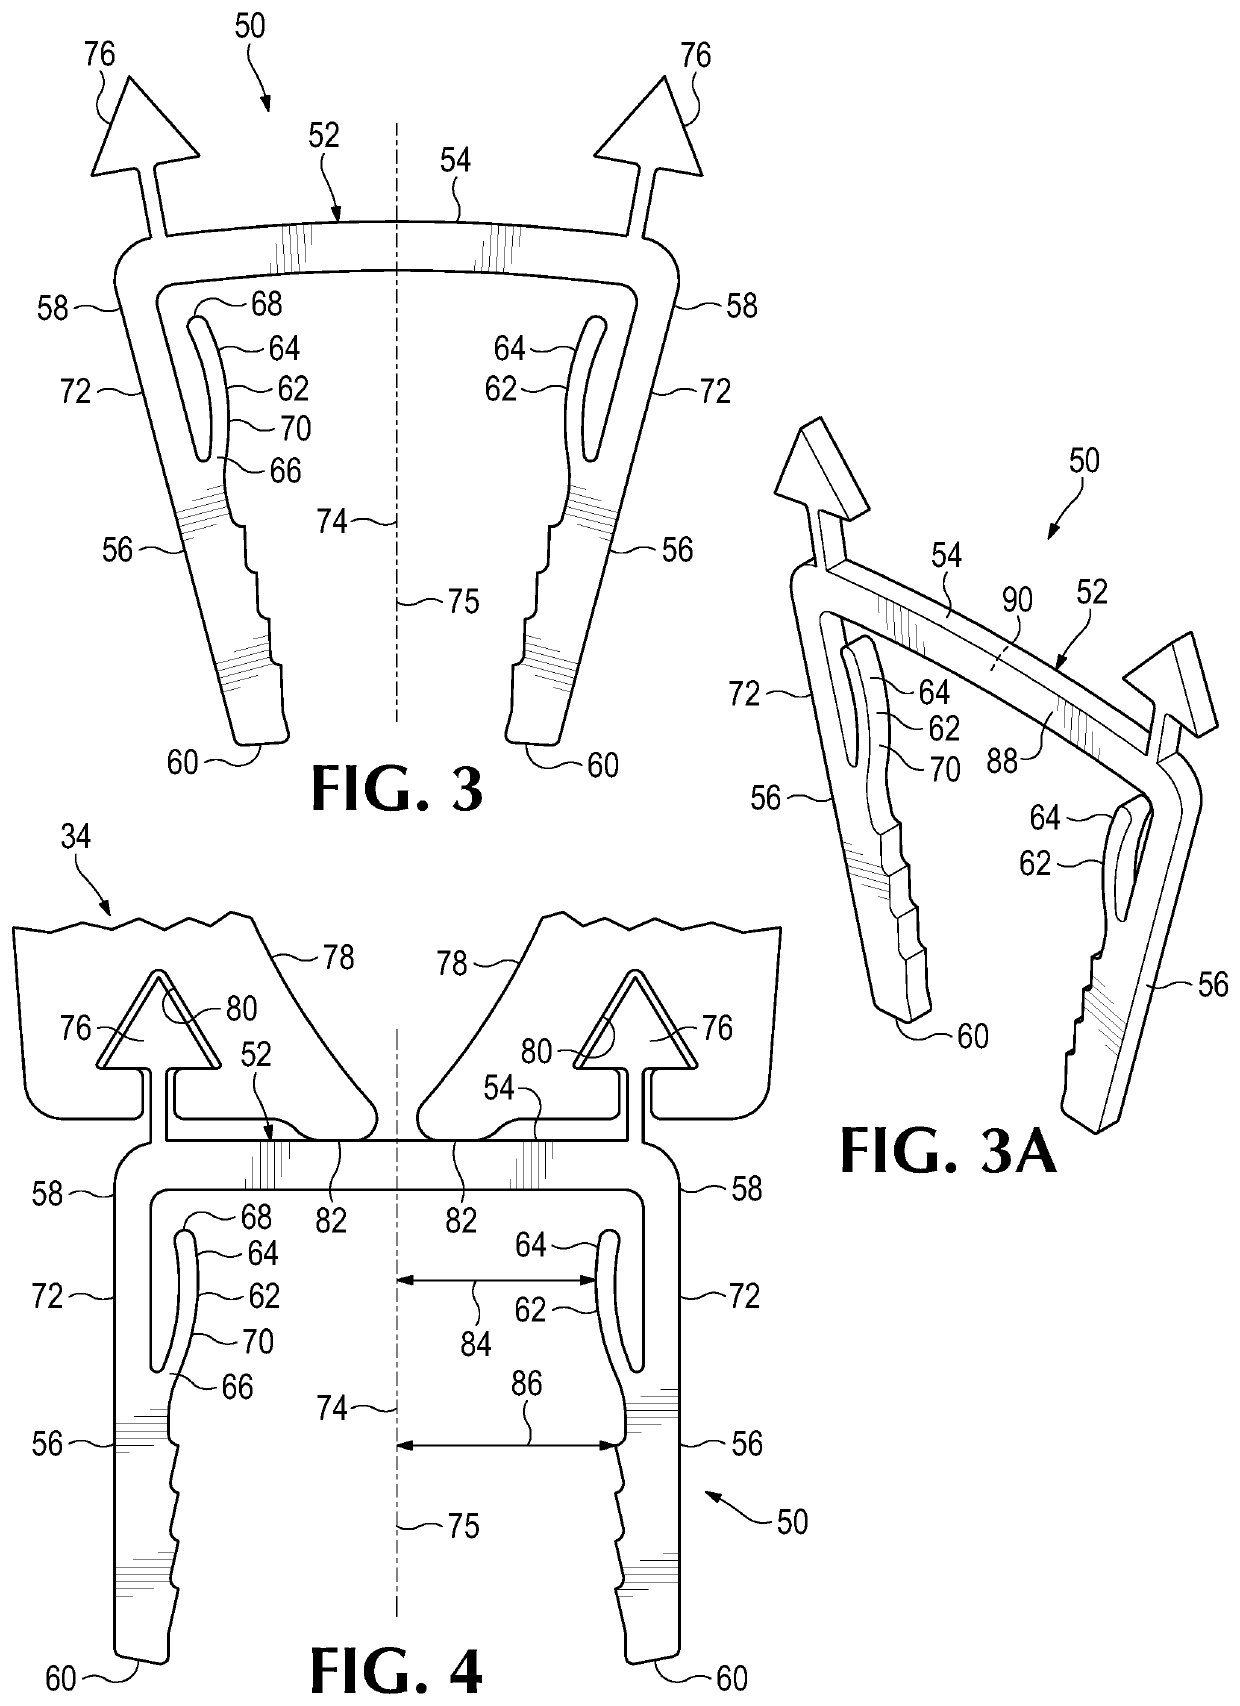 Bone clip with resilient arm for proximal compression